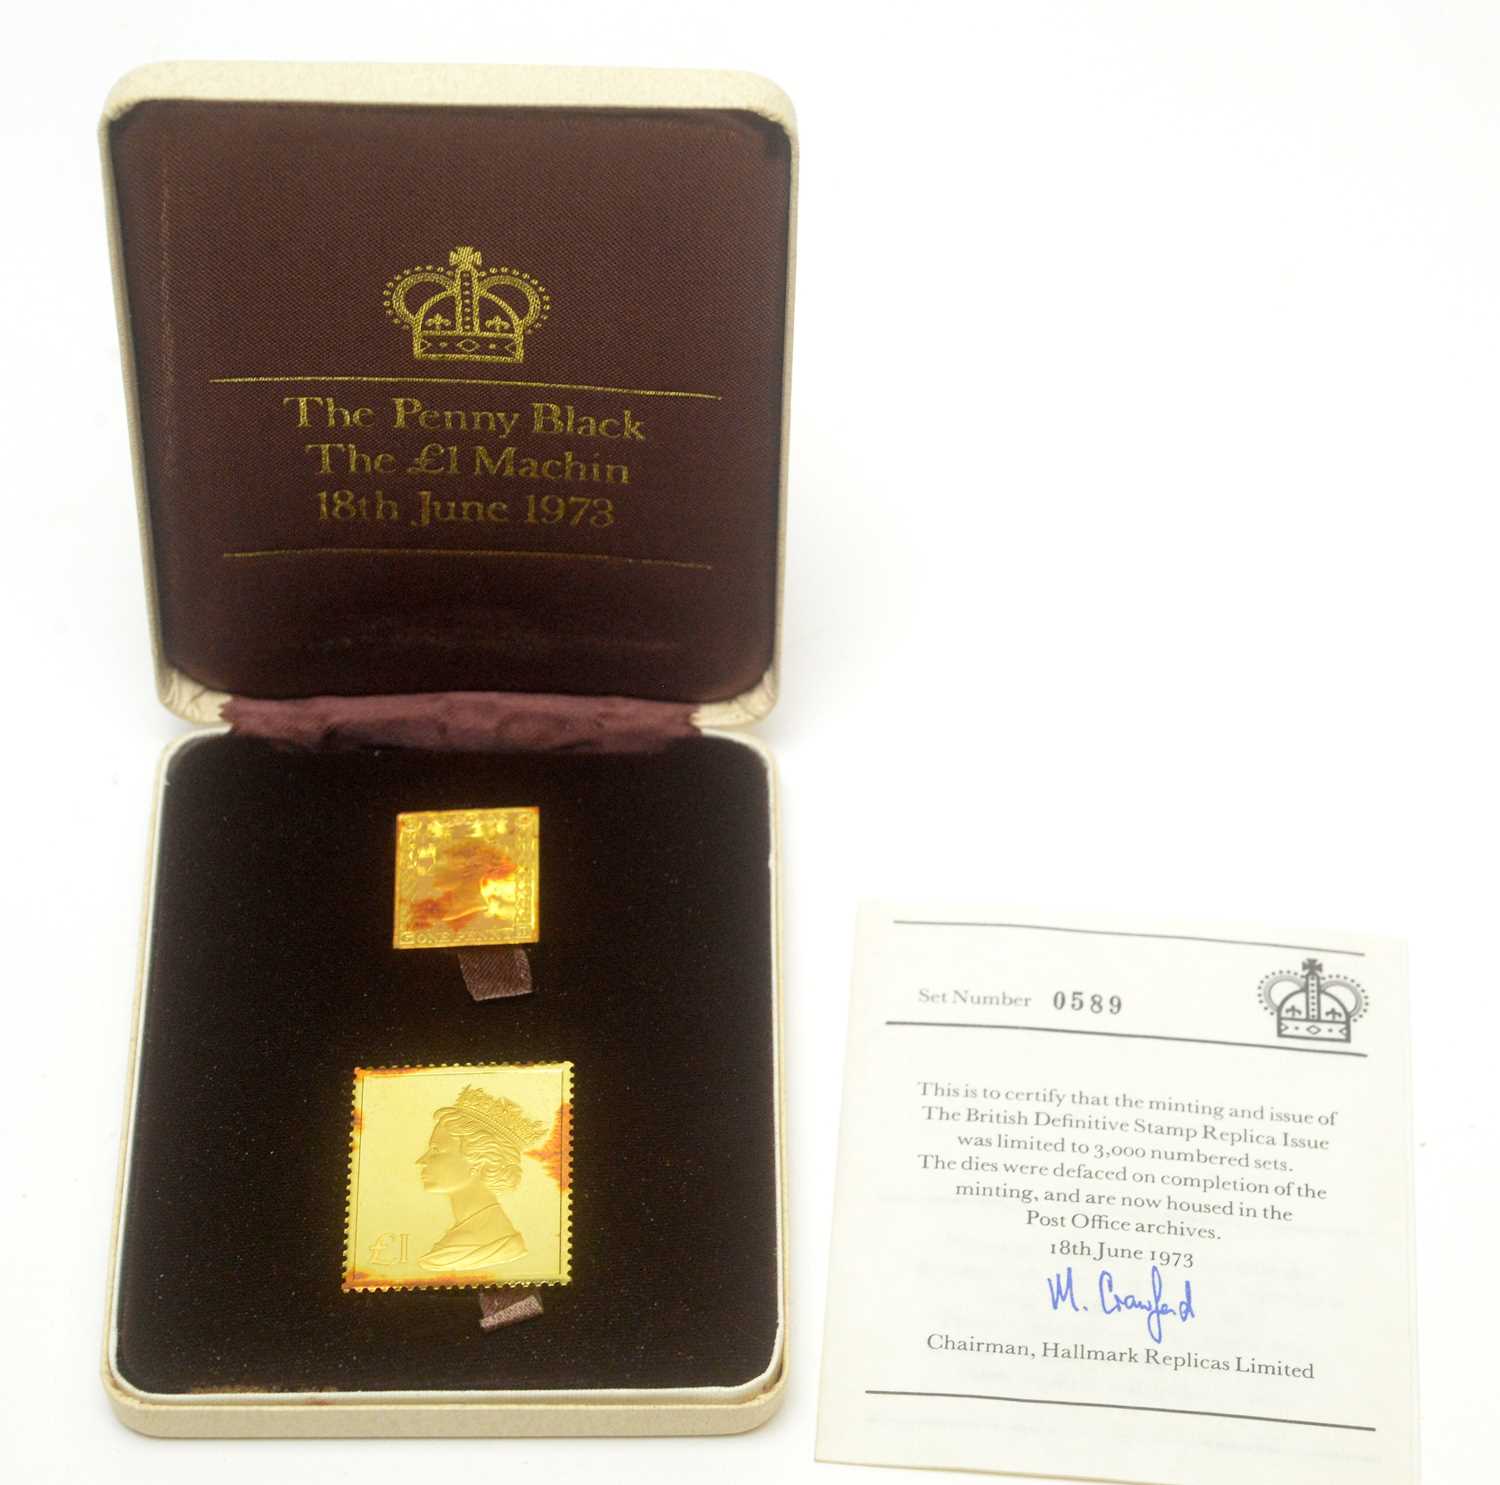 960 - Hallmarks Replica Limited The Penny Black and The £1 Machin stamp replicas,